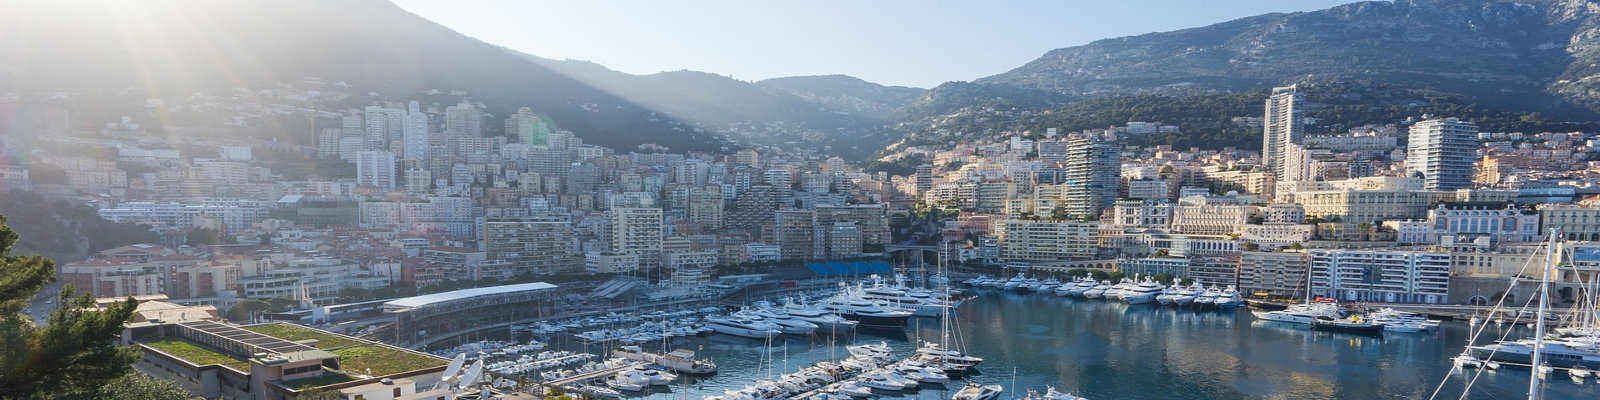 Coveted-views-of-Monte-Carlo-on-the-Cote-d'Azur